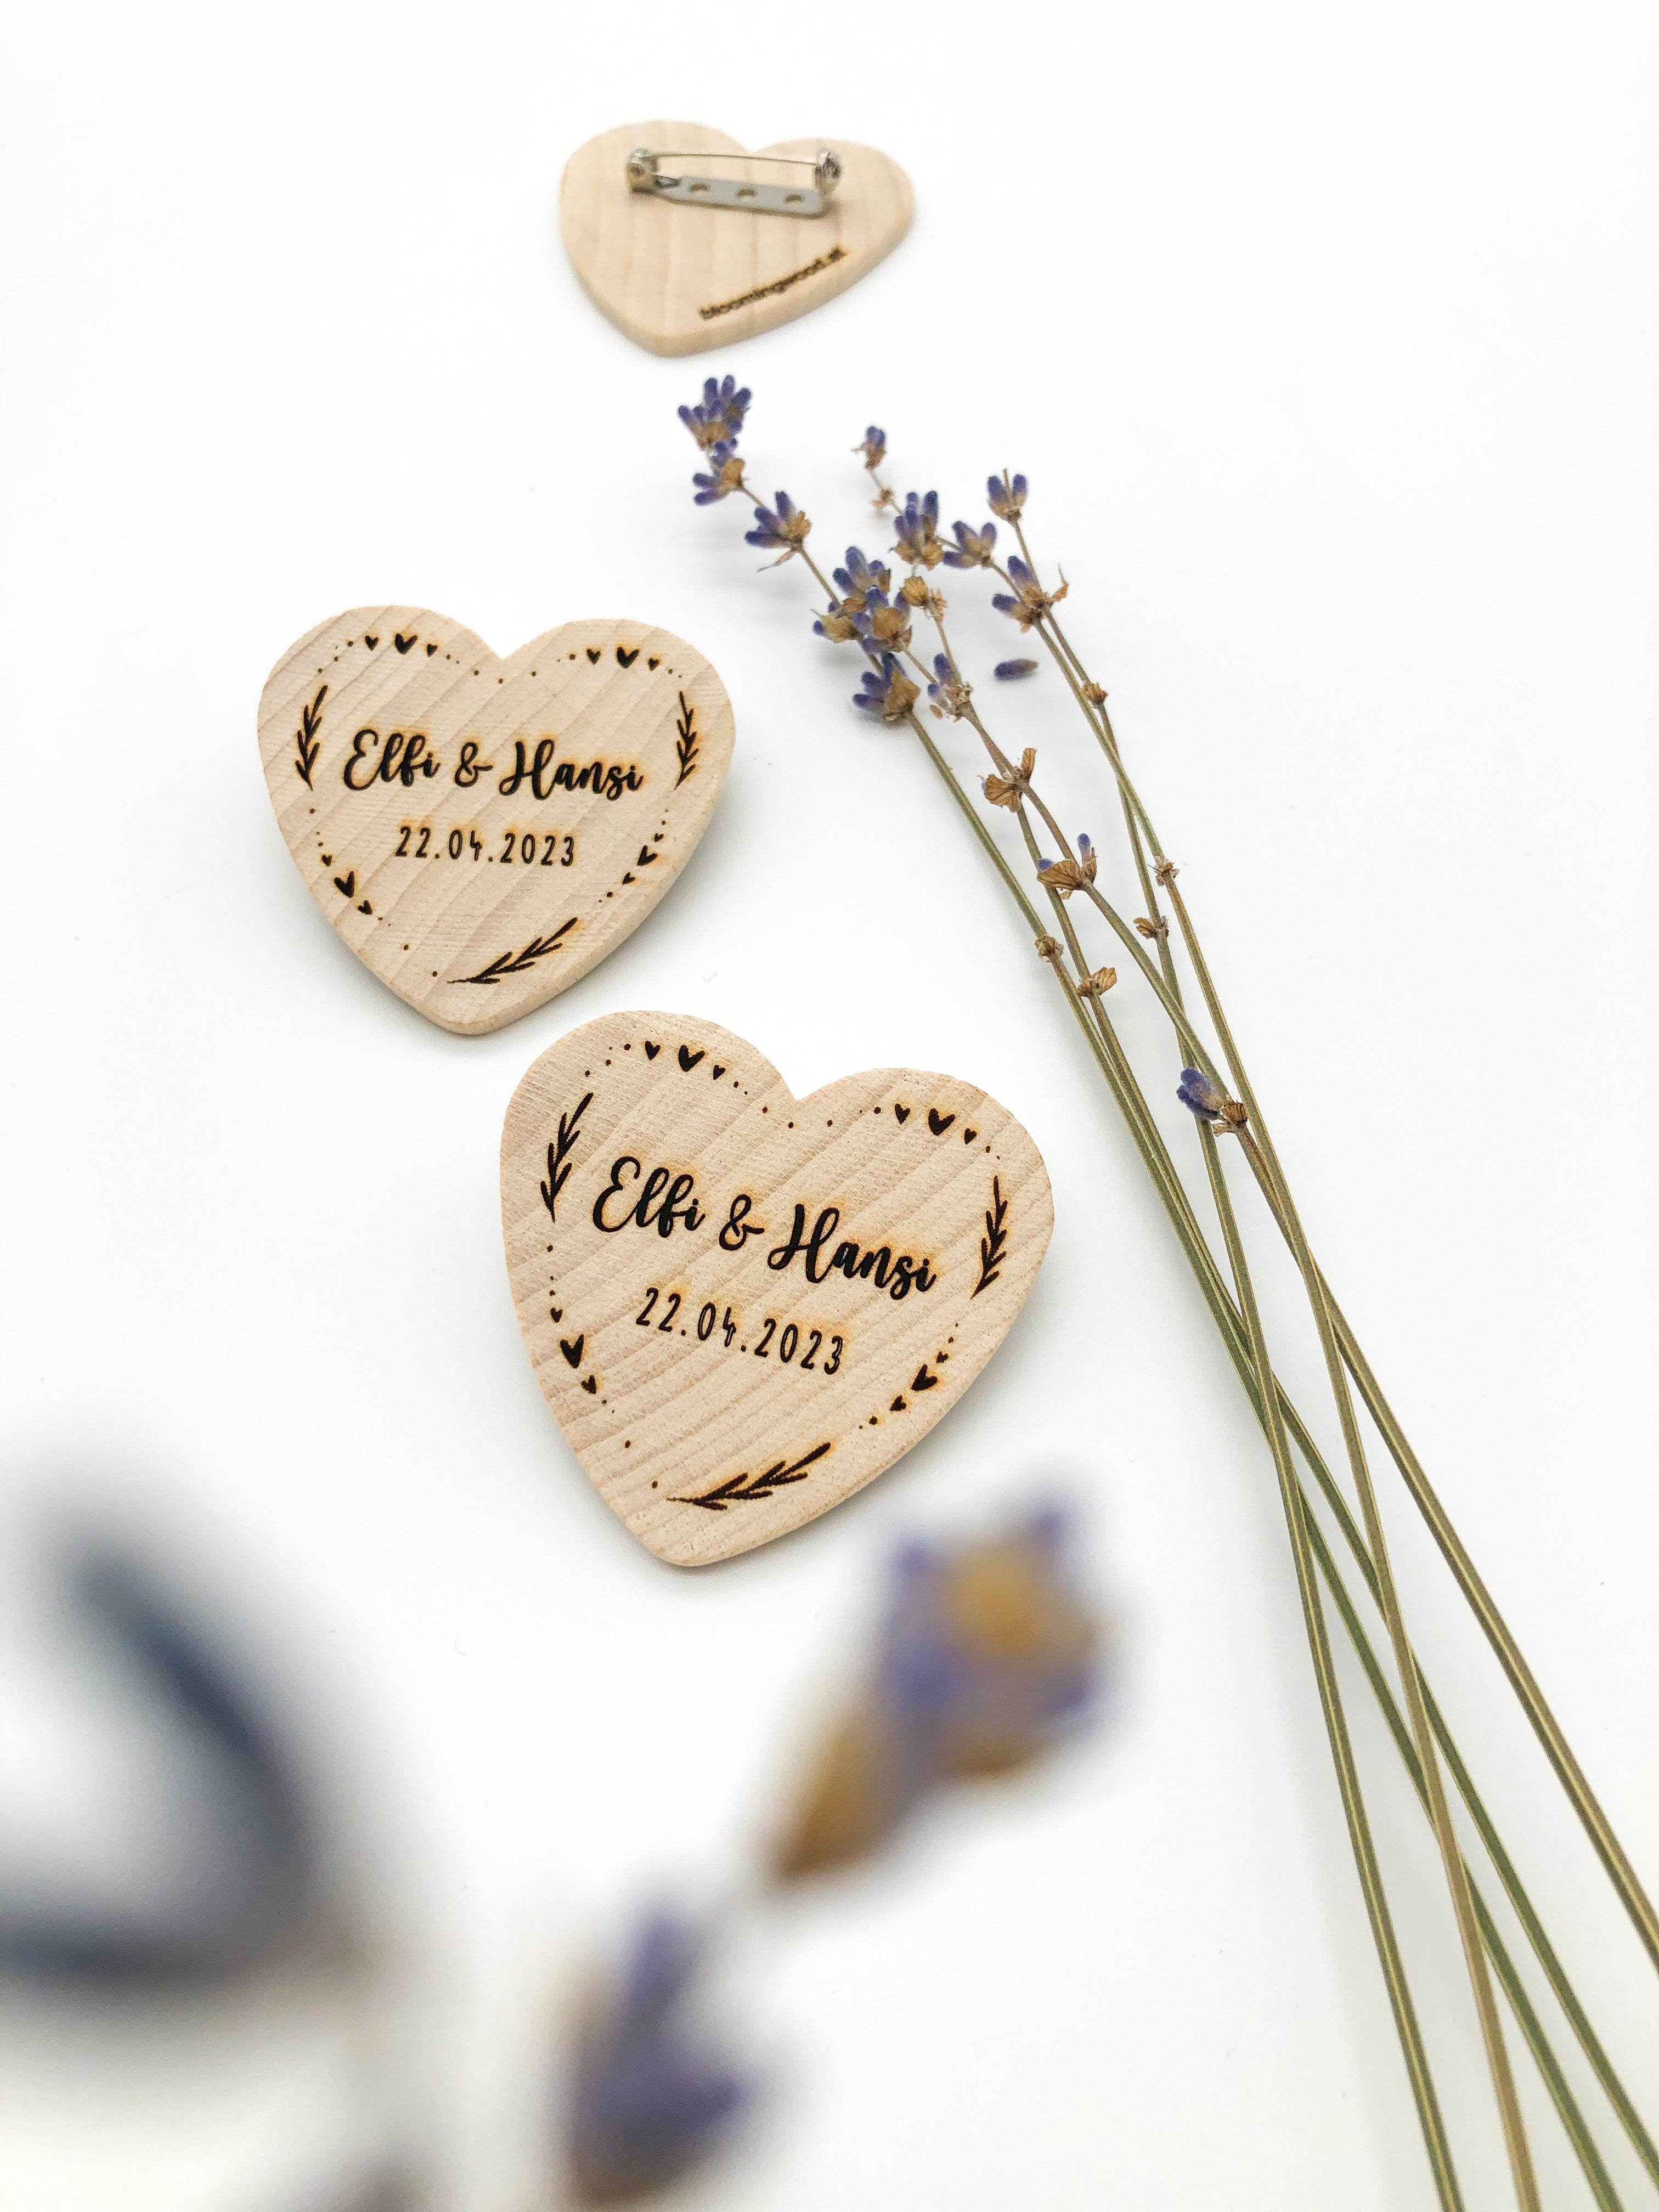 Wedding pin heart made of wood personalized (font calligraphy)